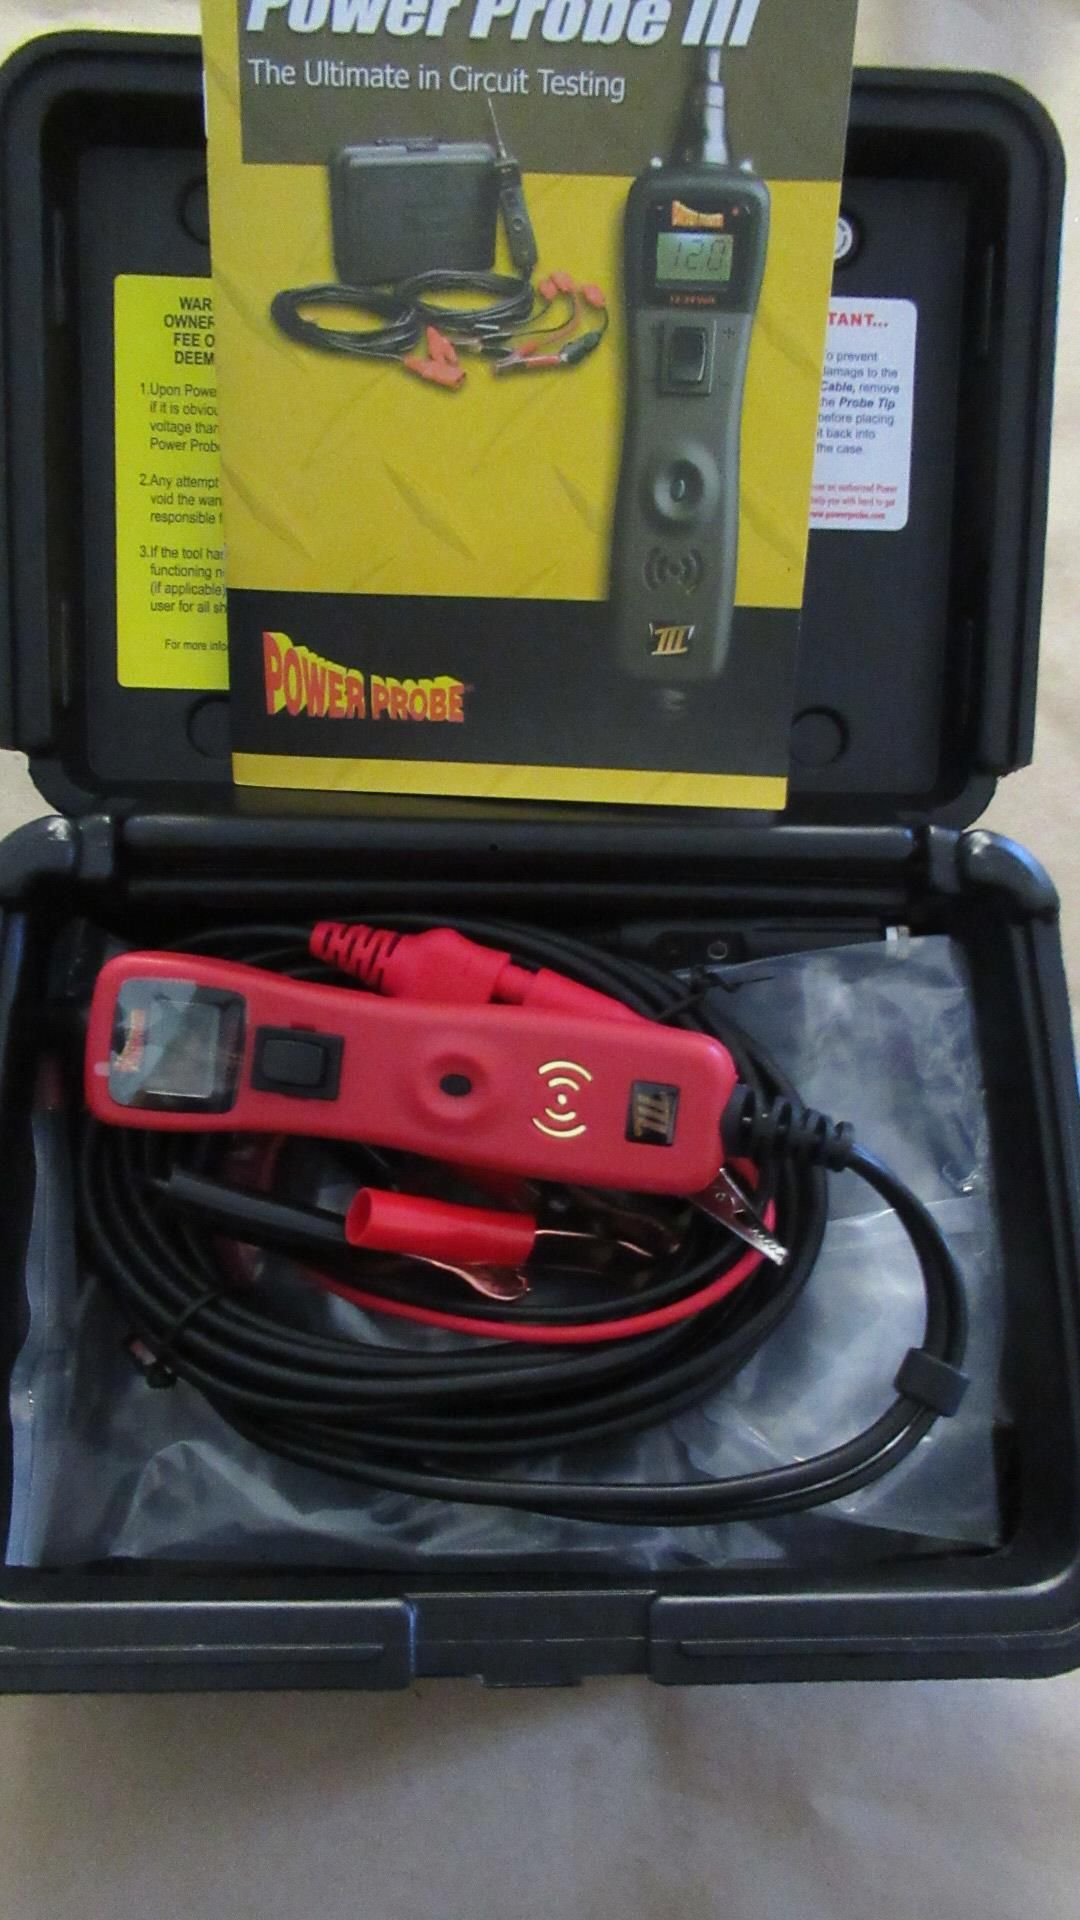 POWER PROBE III CIRCUIT TESTER PP319FTCRED